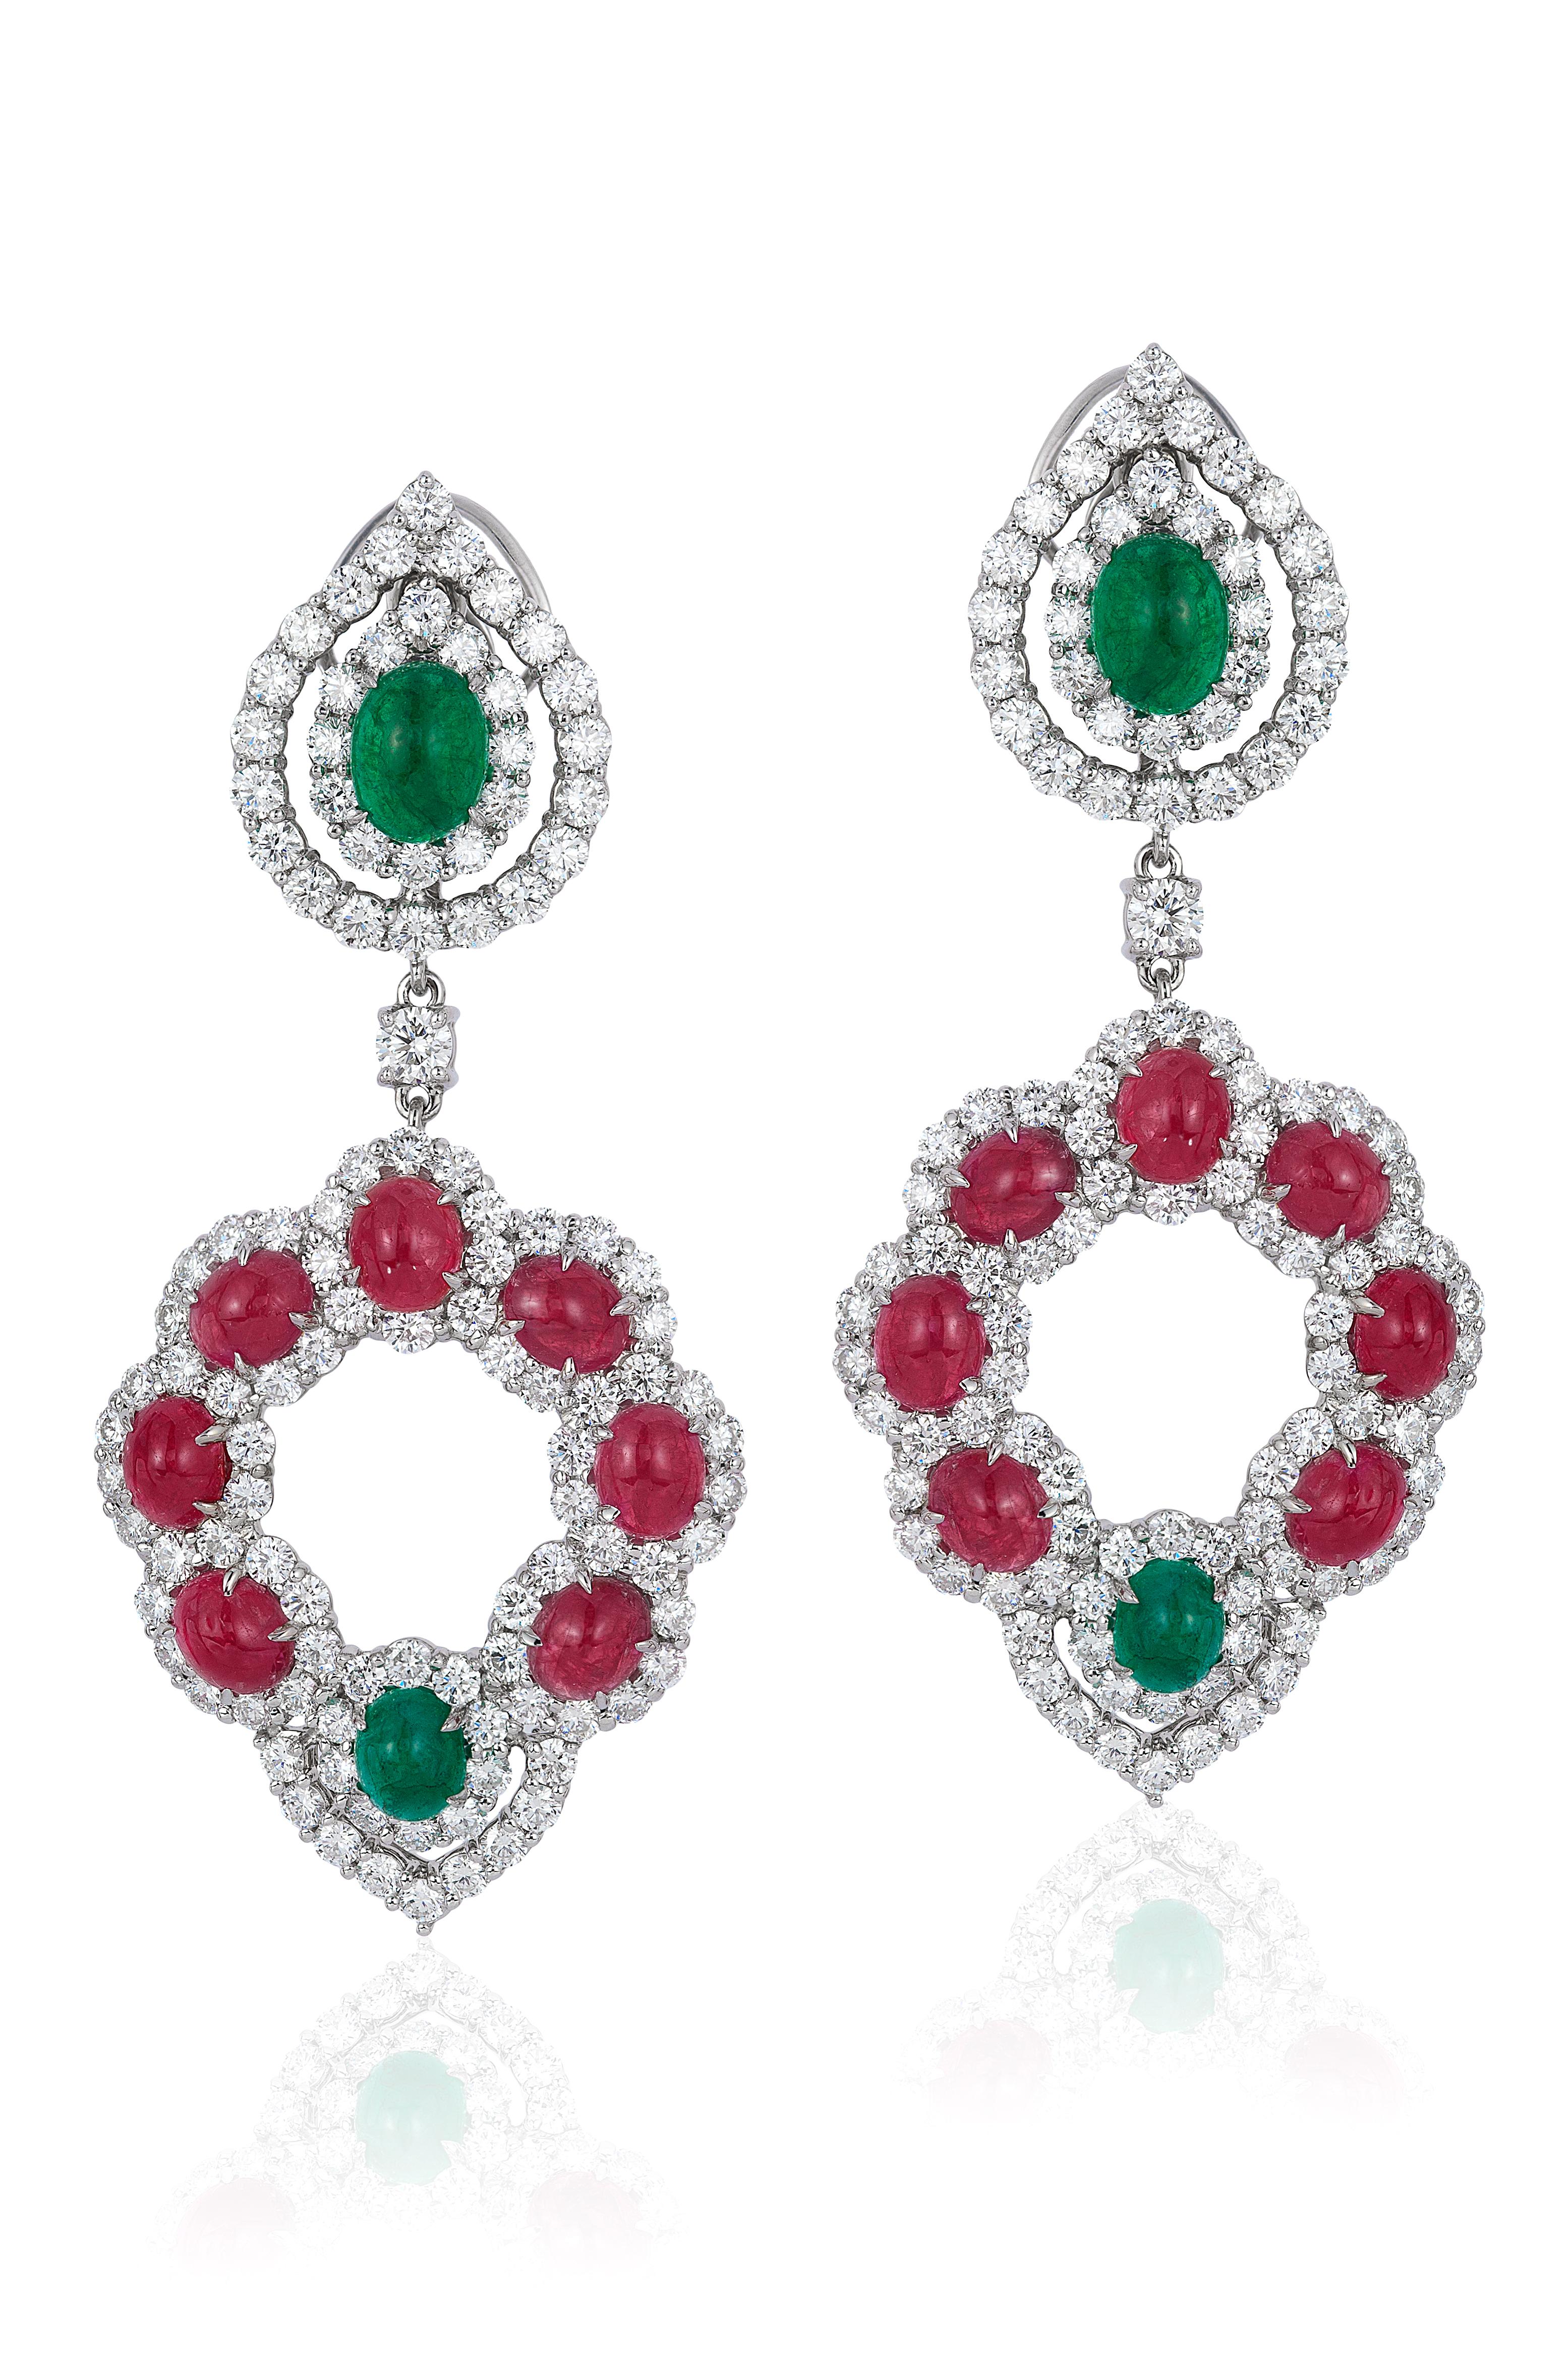 Andreoli Emerald Ruby Cabochon Diamond Chandelier Earrings 18 Karat White Gold

These earrrings feature:

9.38 carats of F-G-H Color, VS-SI Clarity round brilliant cut diamonds
4.40 carats of Four Emerald Cabochons
12.45 carats of 14 Ruby